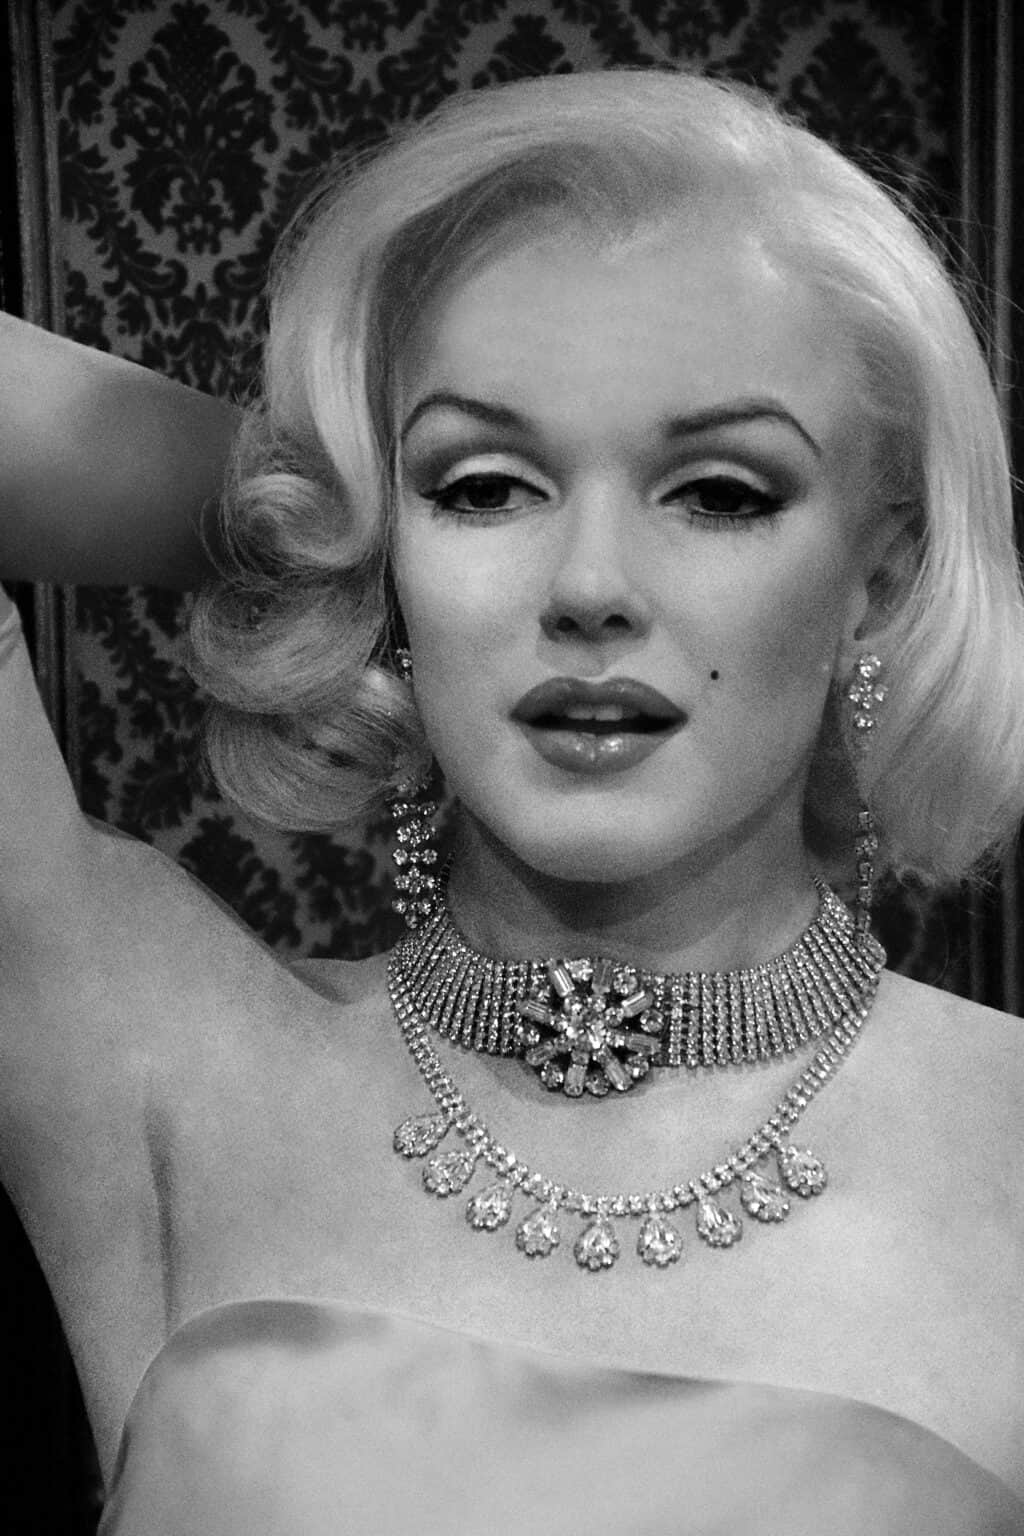 How Much Did Marilyn Monroe's Dress Sell For?